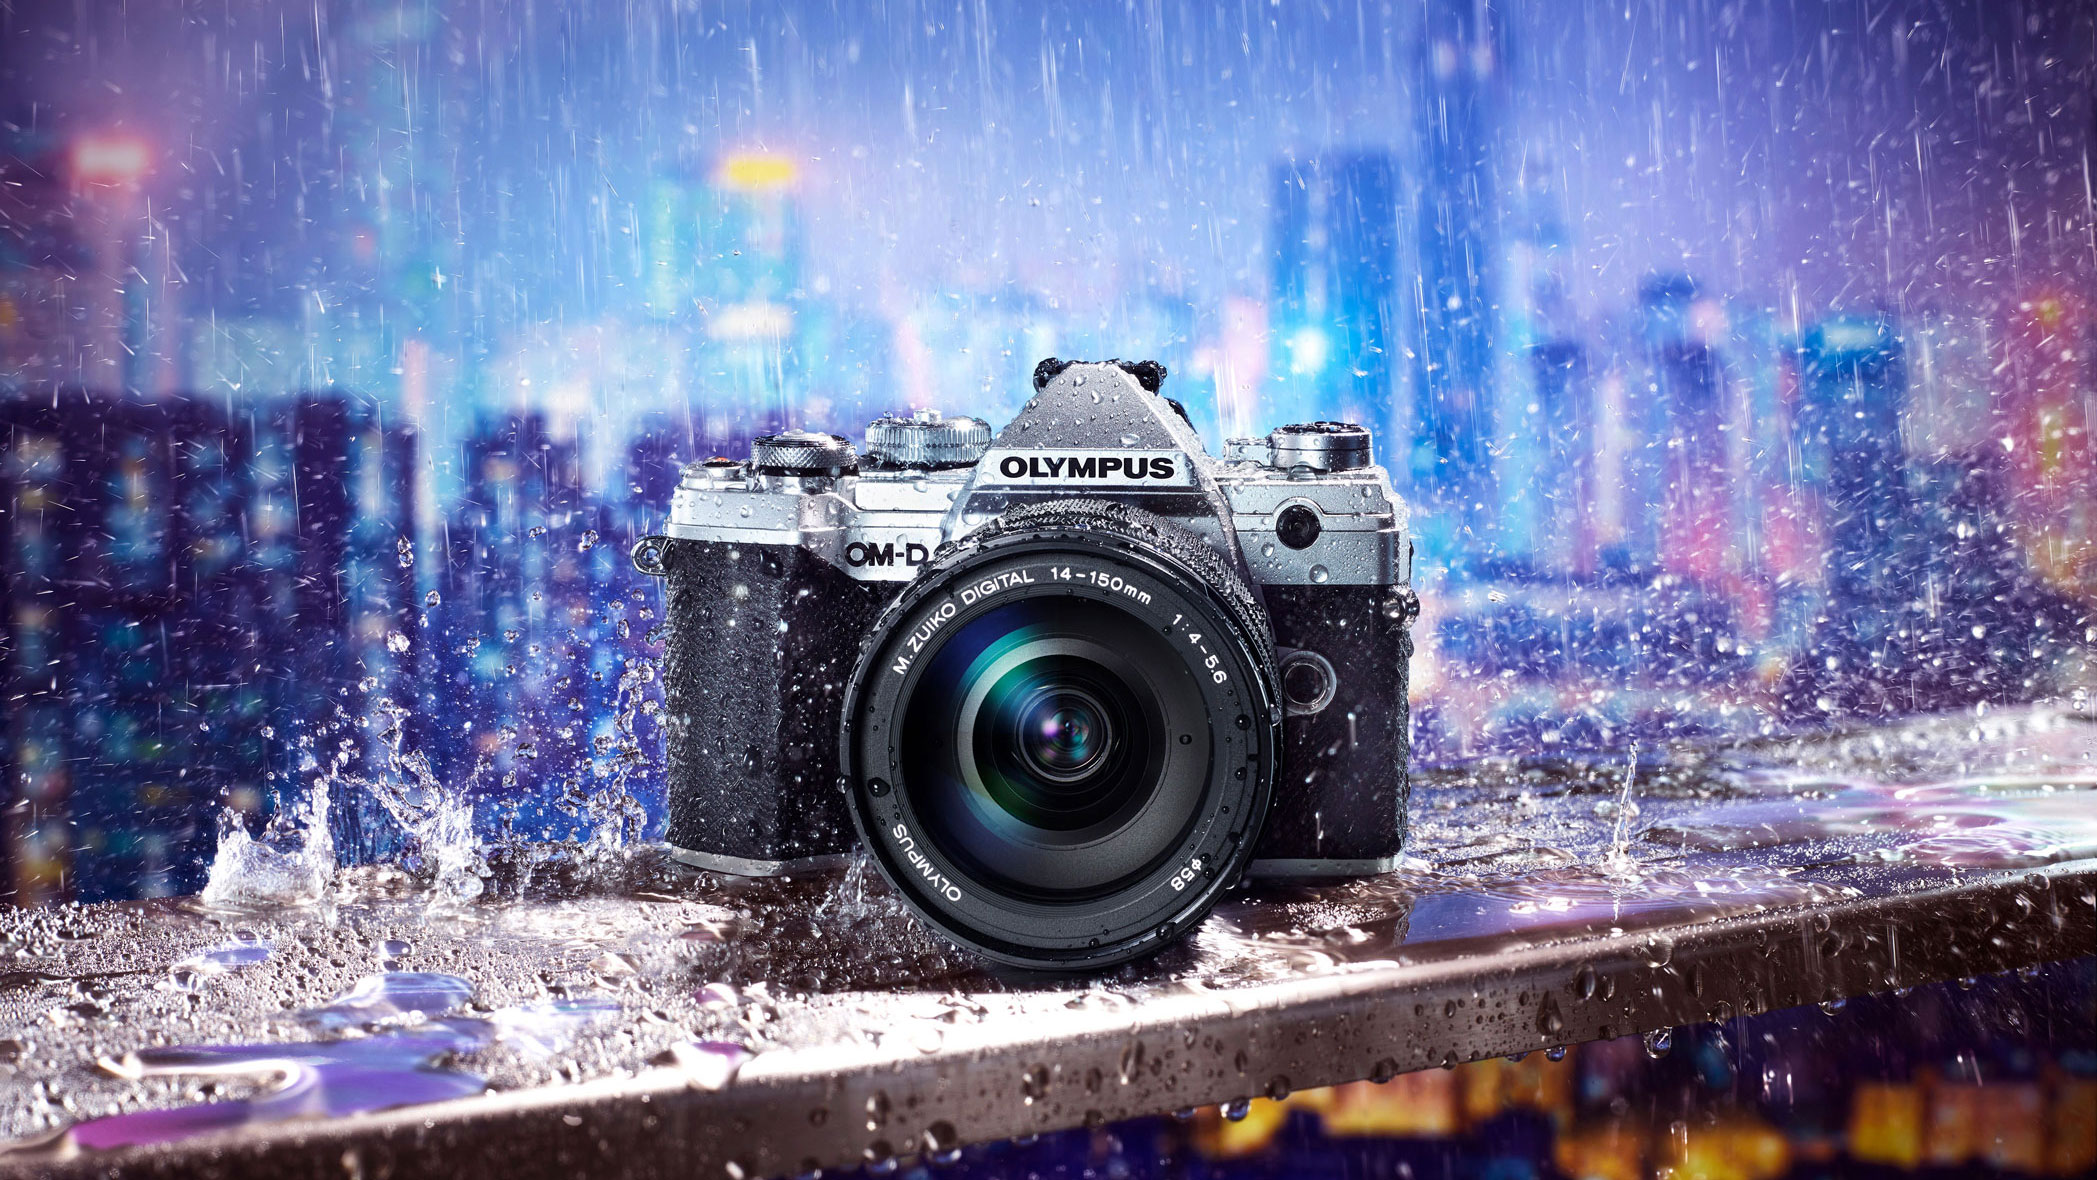 Olympus Om D E M10 Iii Vs E M5 Iii Vs E M1 Ii Which Om D Is Right For You Digital Camera World